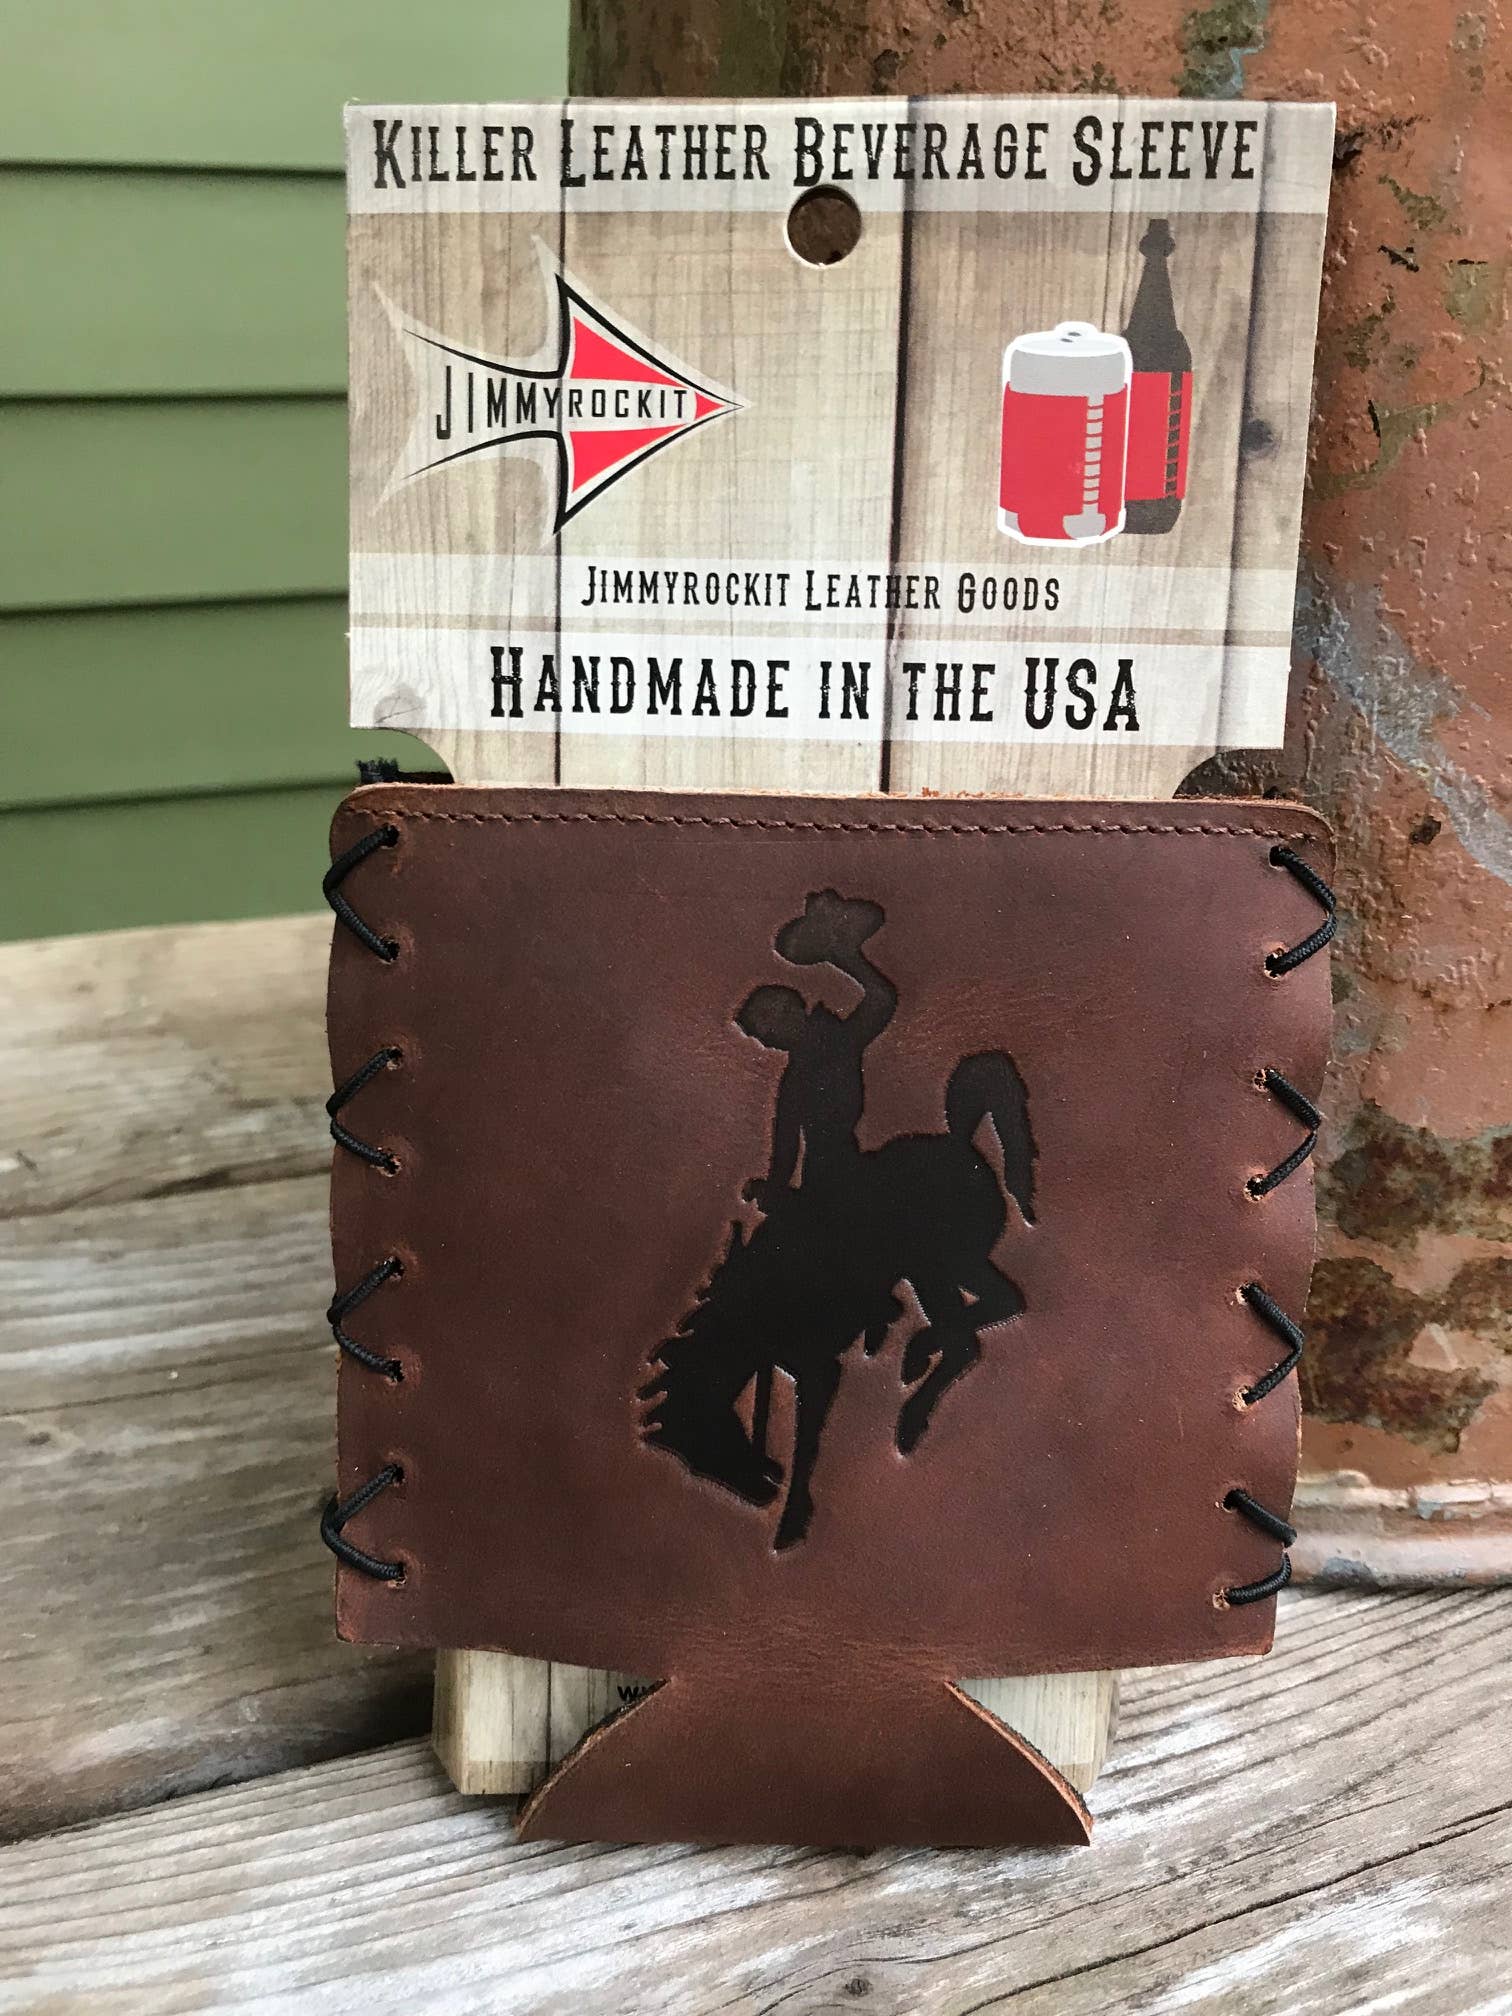 Brand of Bliss Bucking Horse & Rider Cowboy Leather Can Cooler - Koozie